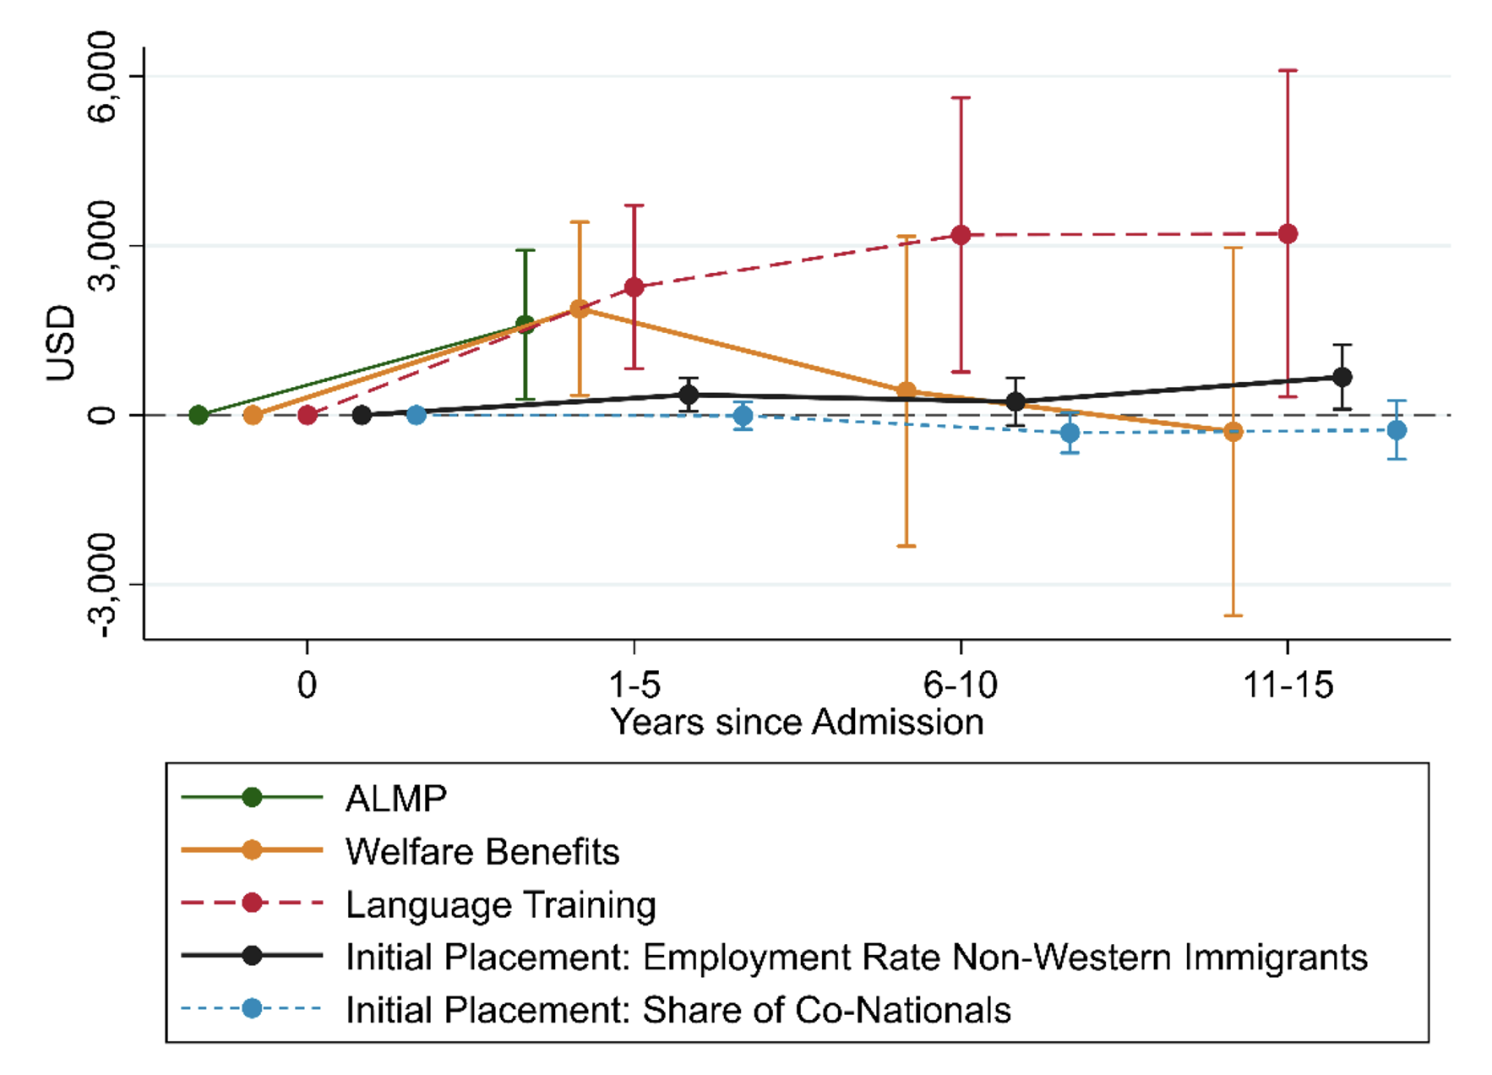 Figure 1 Estimated effects of different policies on refugees’ earnings in the short, medium, and long run